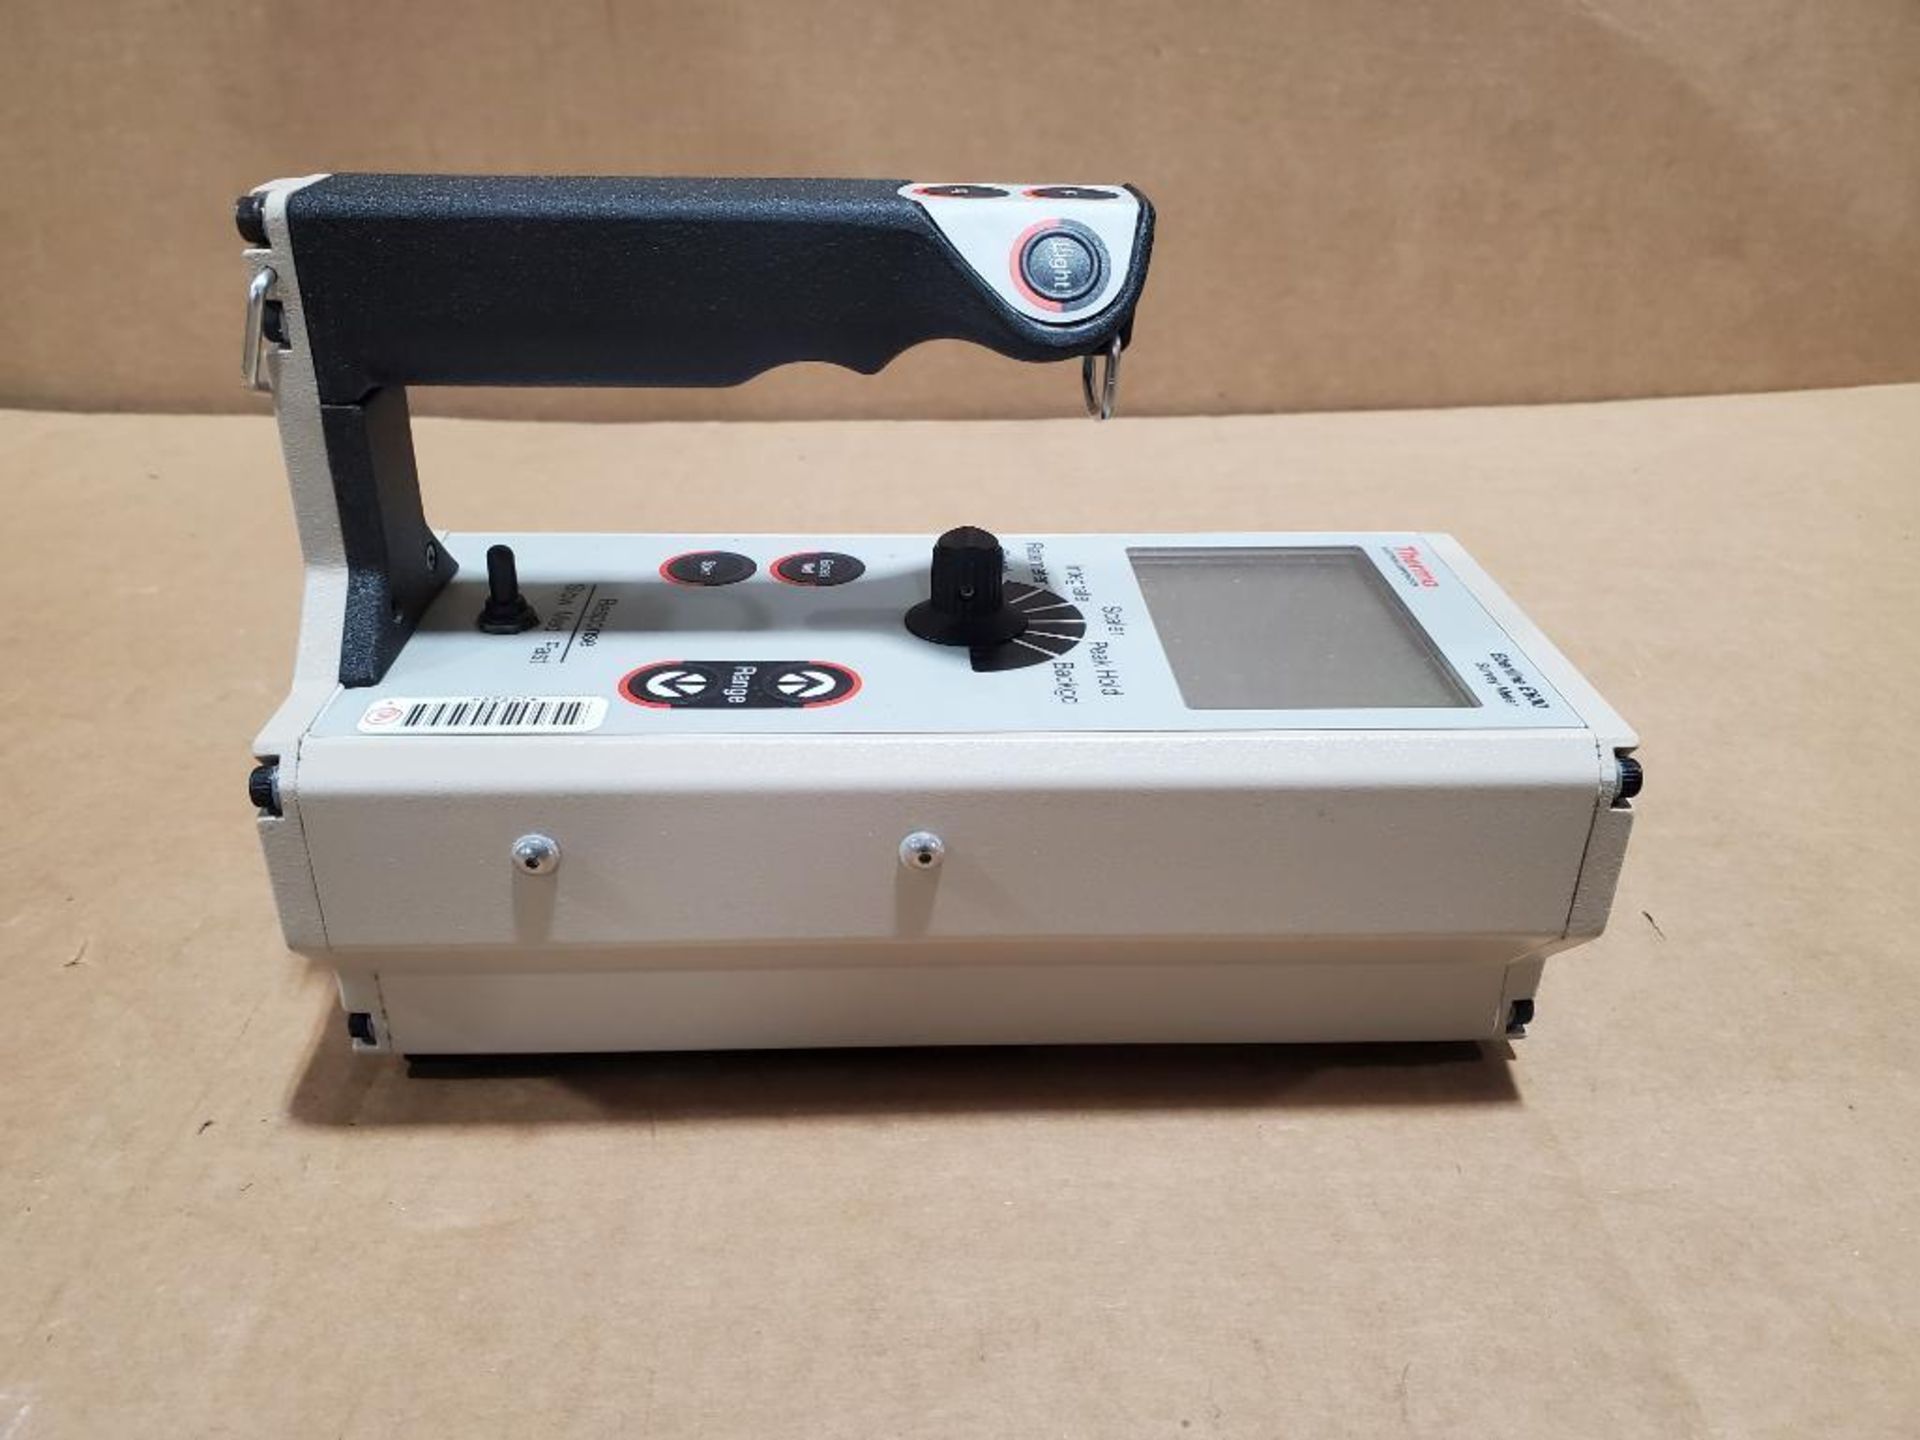 Thermo Electron Corporation geiger counter survey meter. Model Eberline E600. - Image 10 of 10